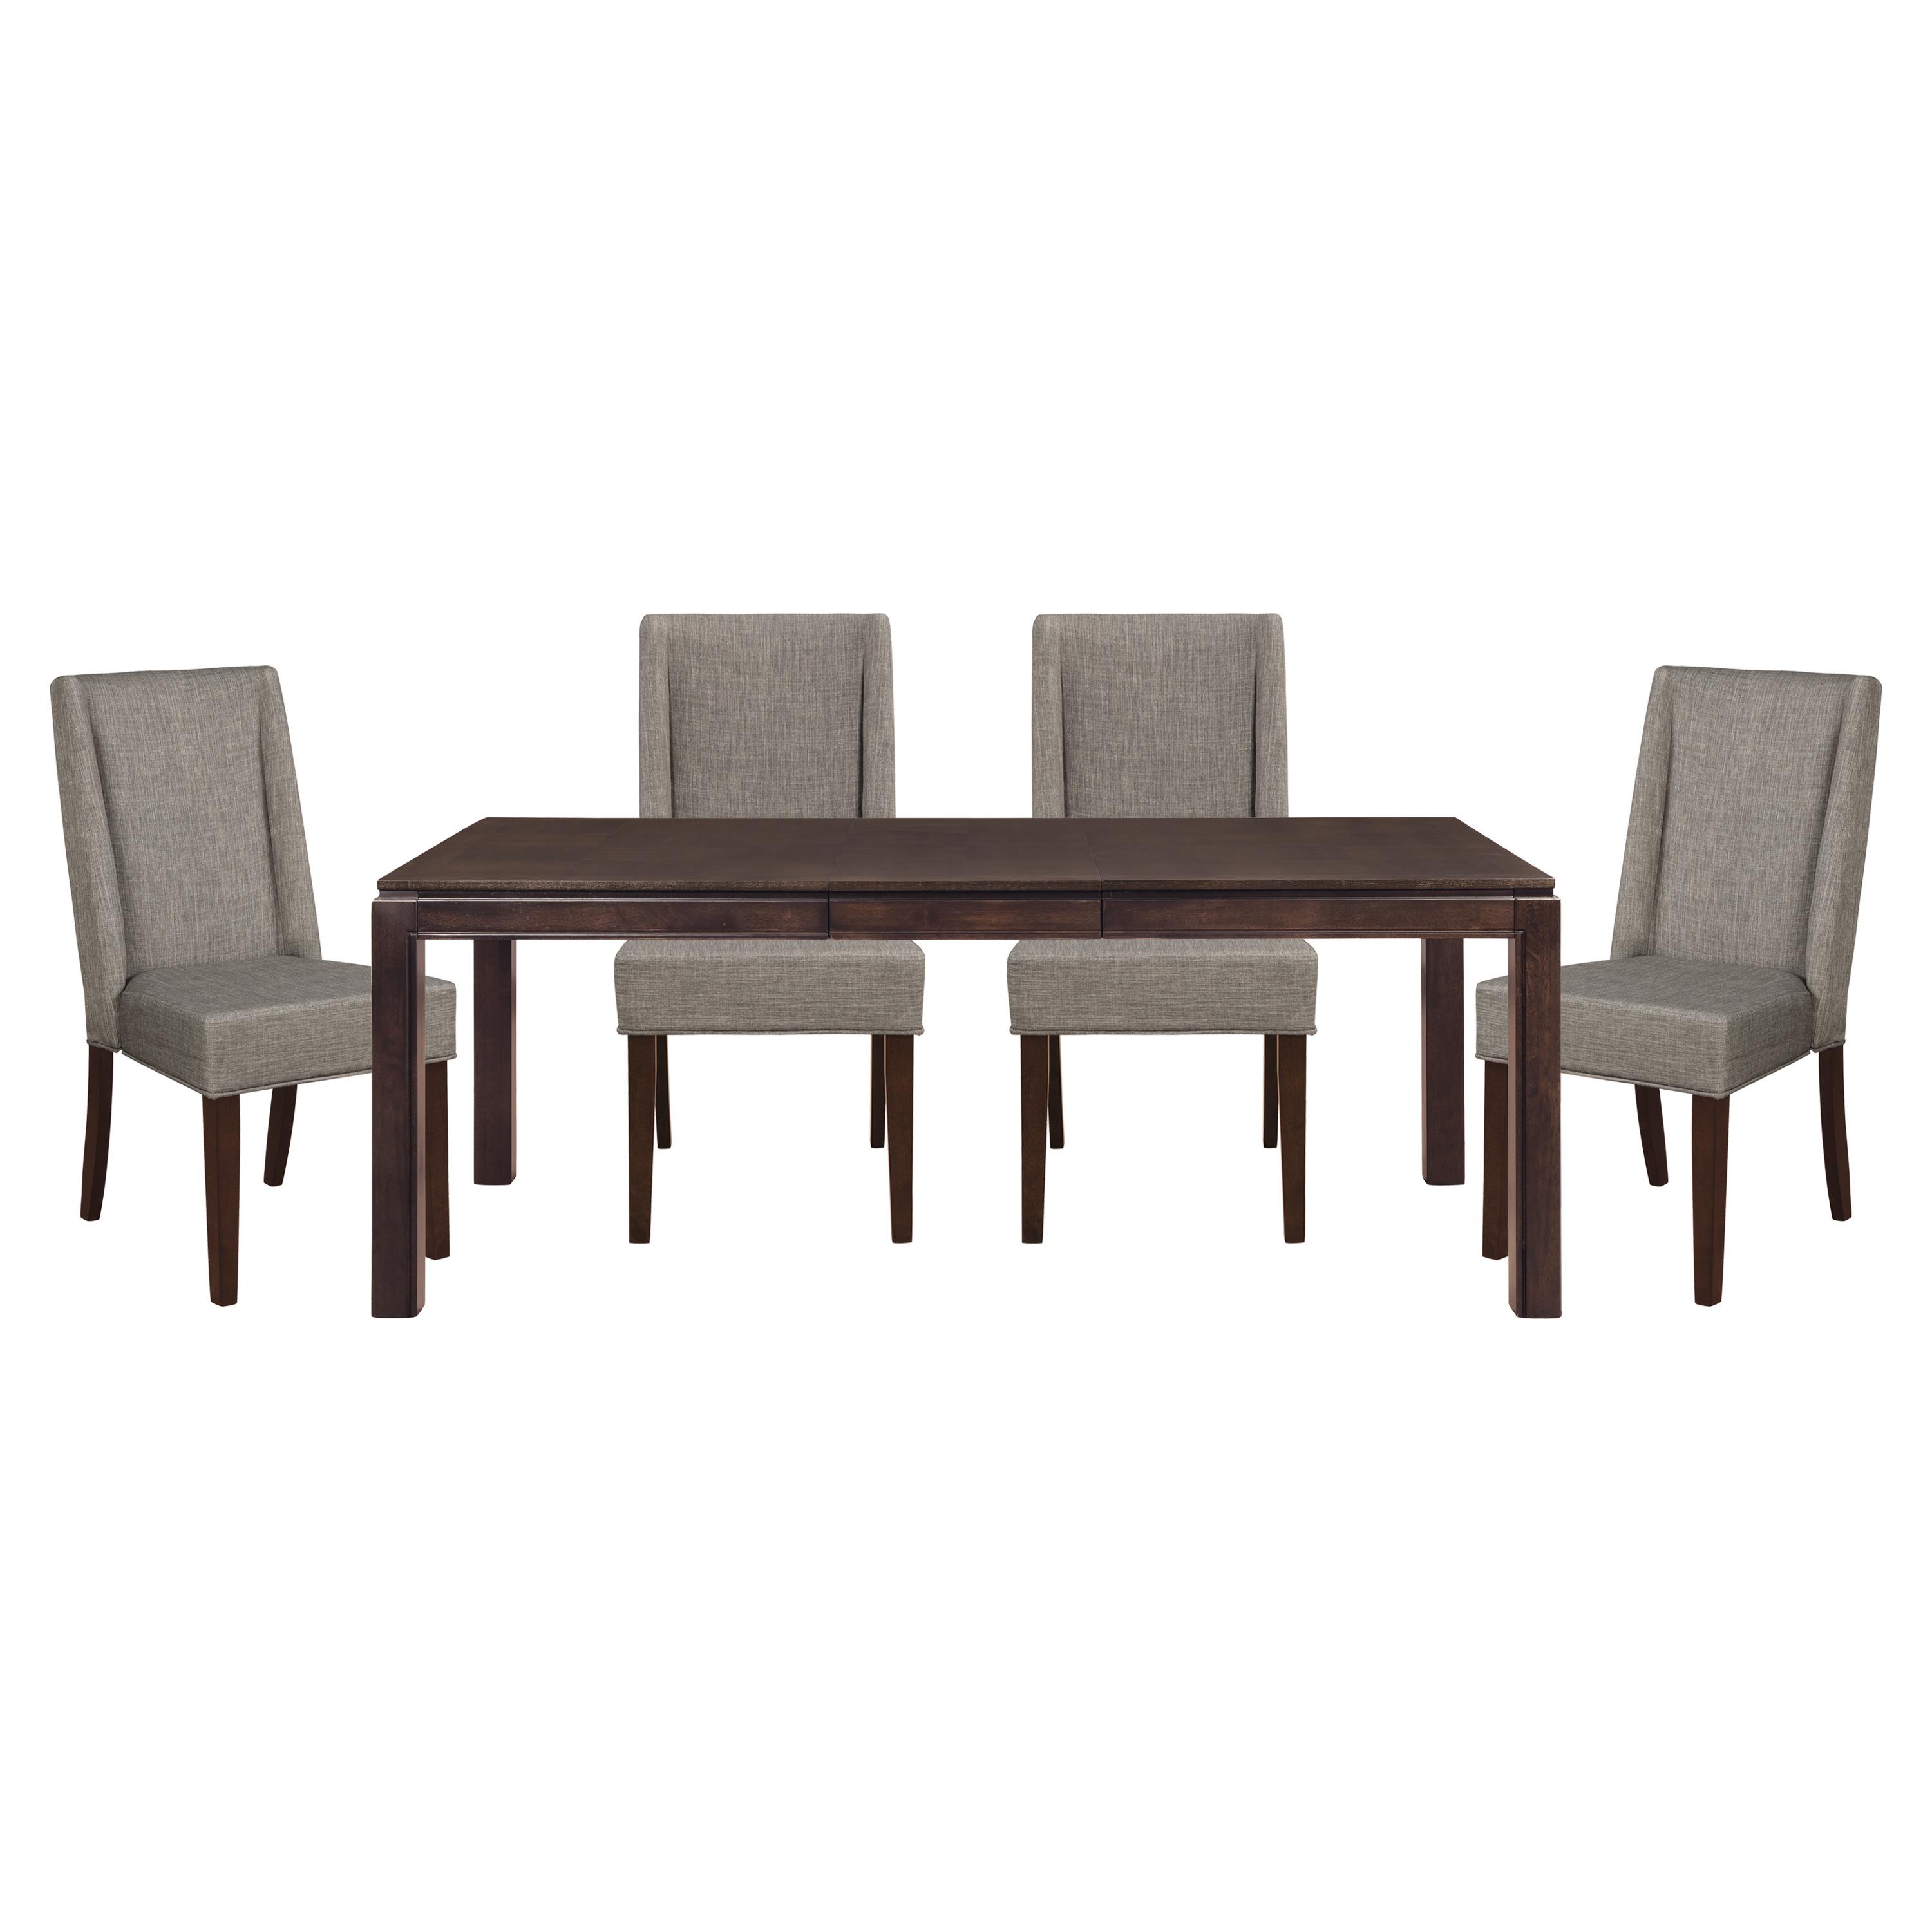 Contemporary Dining Room Set 5409-78*5PC Kavanaugh 5409-78*5PC in Dark Brown Polyester